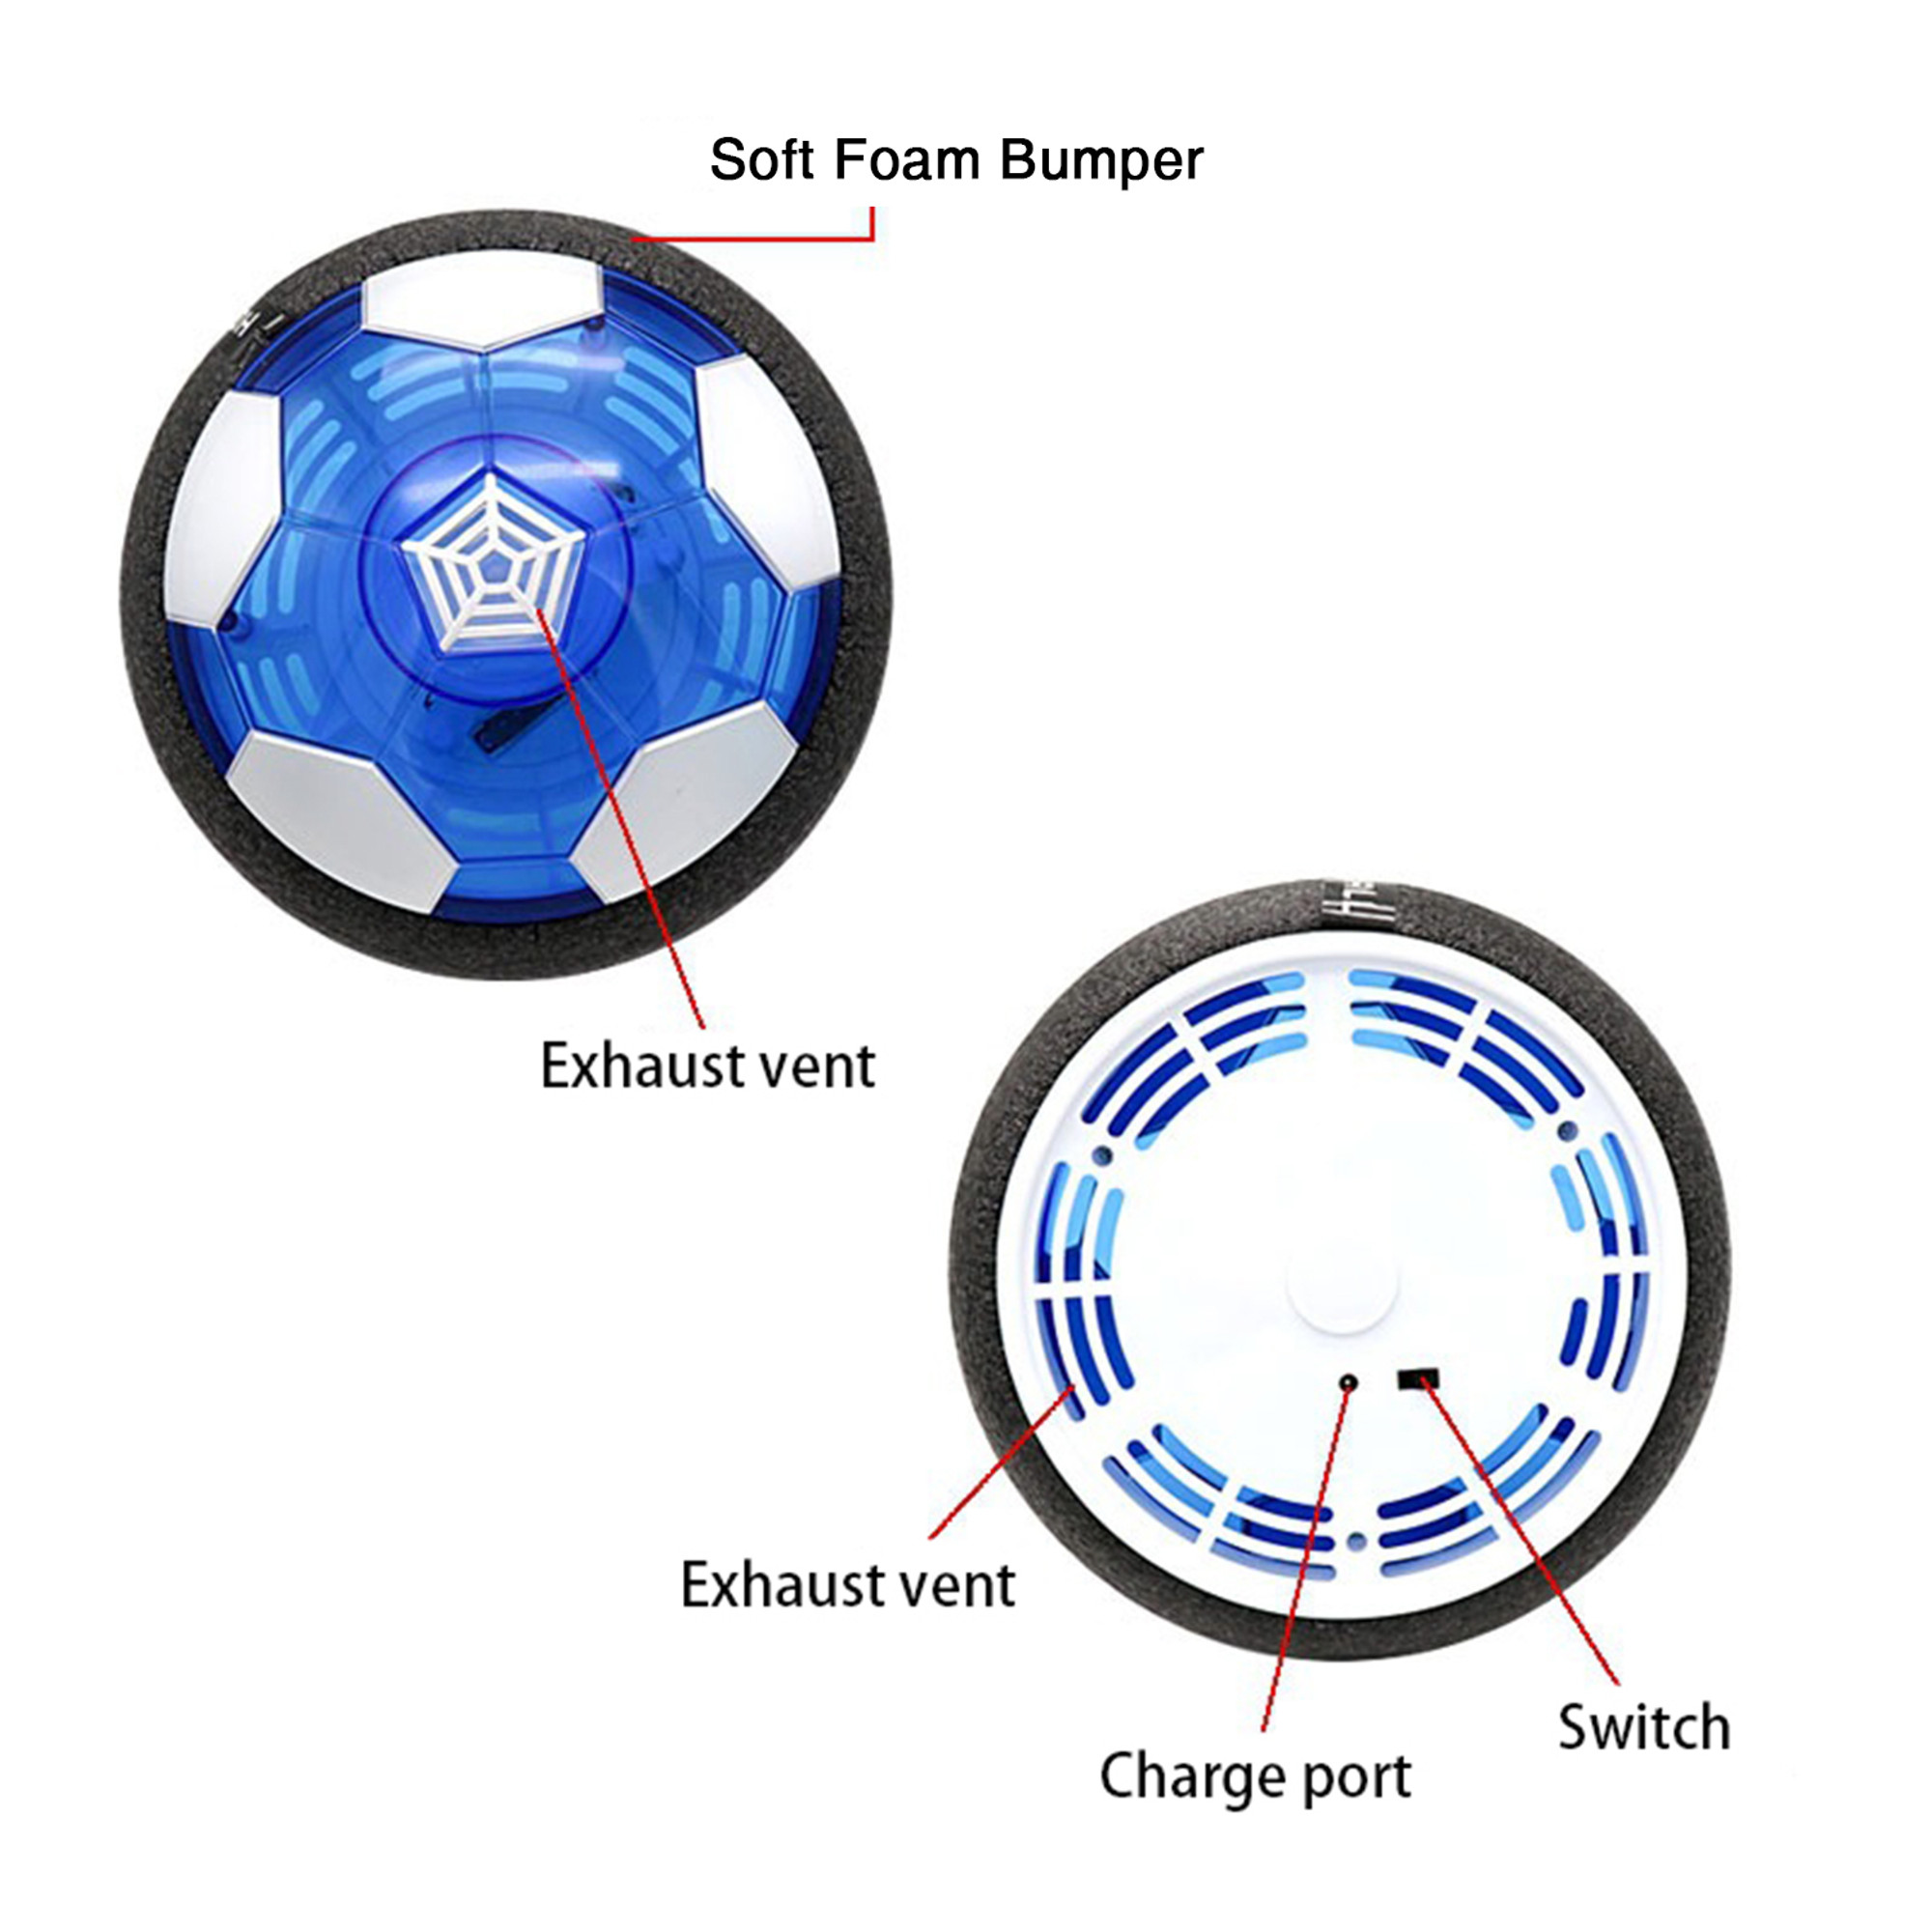 Hover Soccer Ball For Boys & Girls, Rechargeable Air Floating